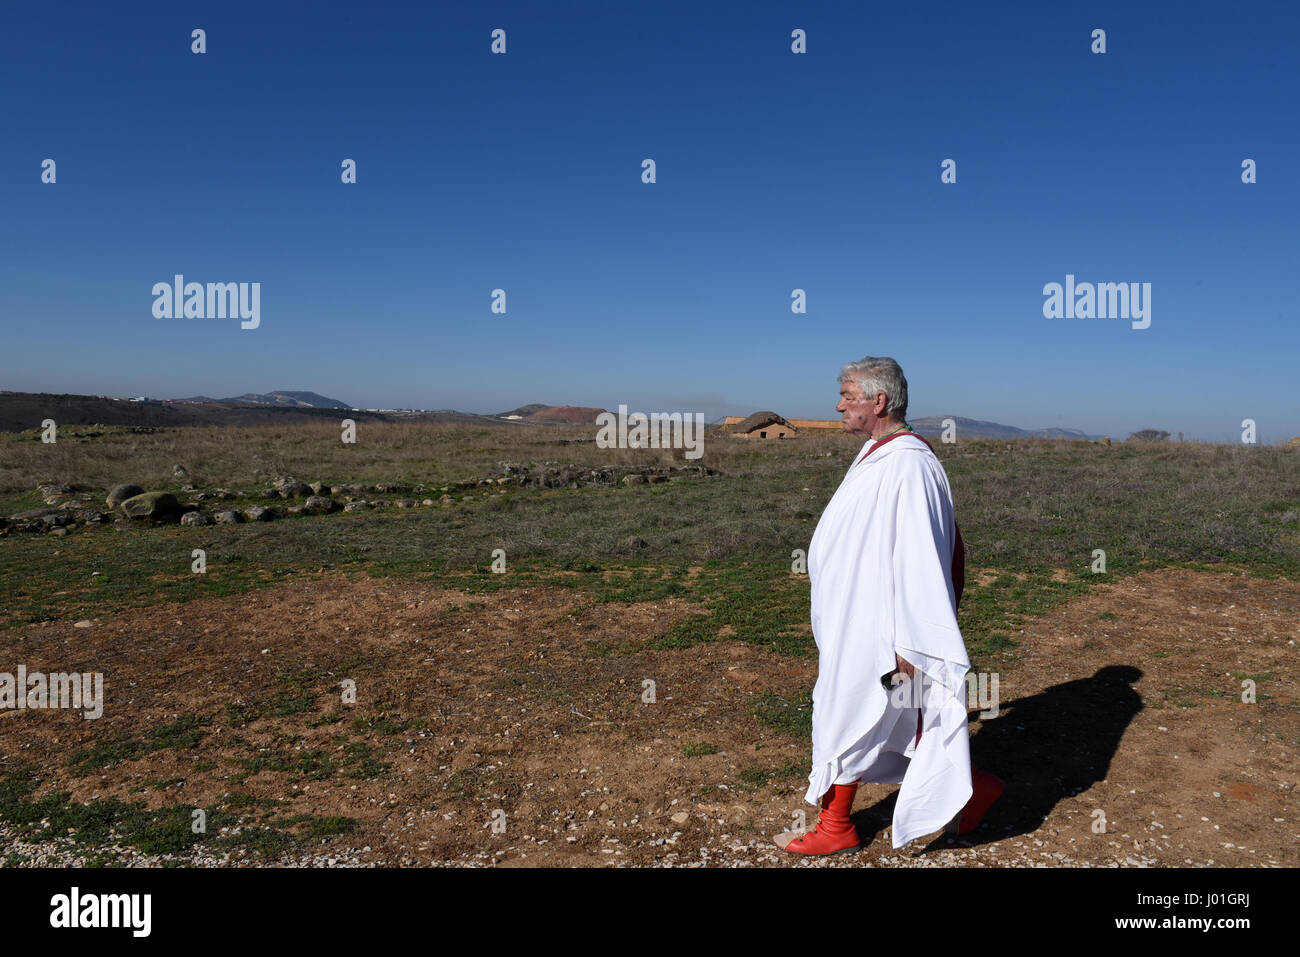 Garray, Spain. 08th Apr, 2017. A man wearing a costume of ancient times during a representation in the ancient Celtiberian settlement of Numantia, famous for its role in the Celtiberian War, in Soria, north of Spain. Credit: Jorge Sanz/Pacific Press/Alamy Live News Stock Photo